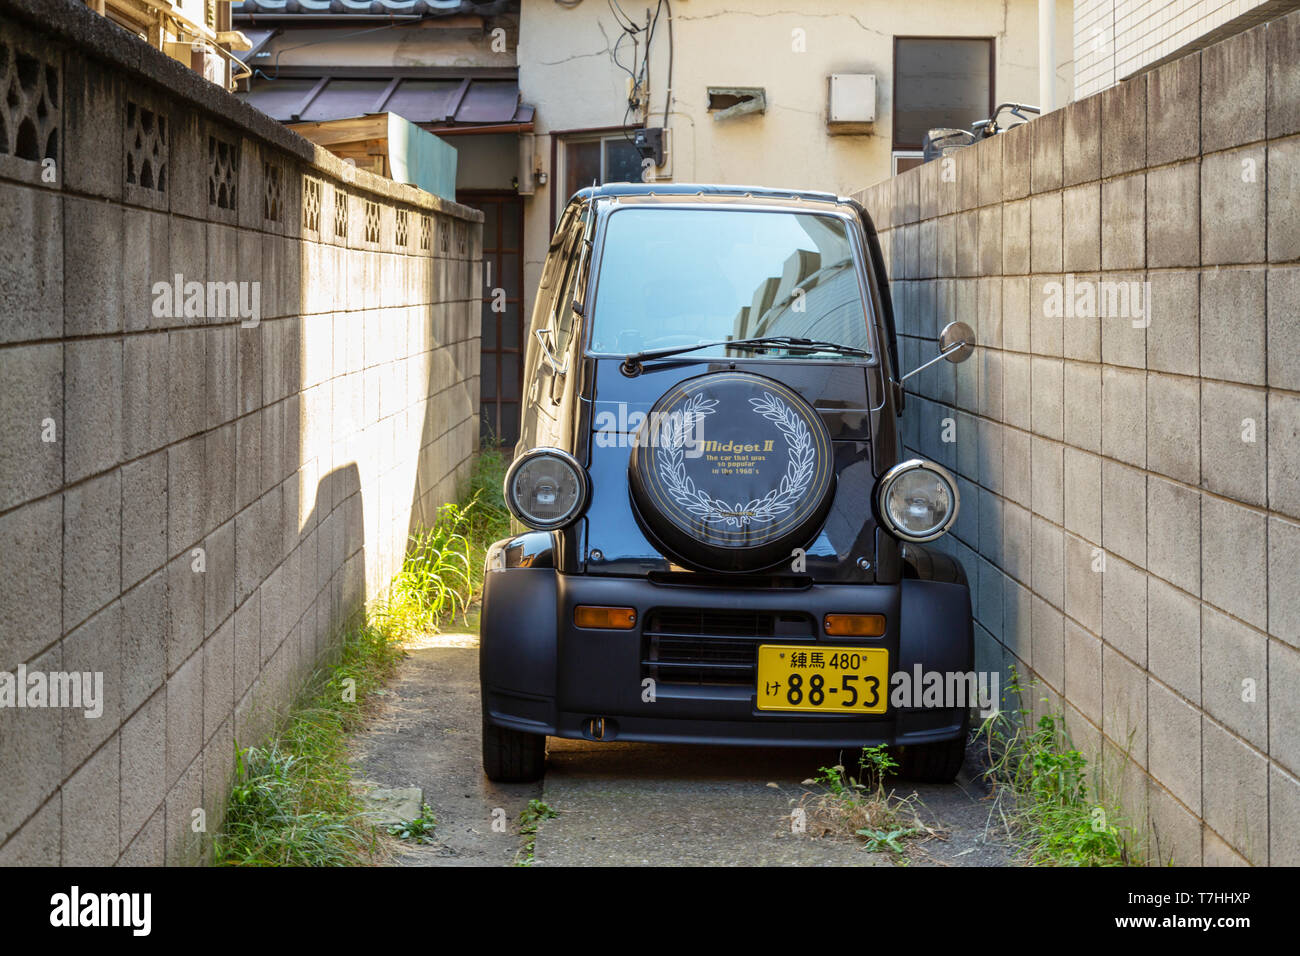 Daihatsu Midget II Japanese small city car. mini cars parking in a narrow alley at the house in Tokyo, Japan. Daihatsu Midget II second generation, th Stock Photo